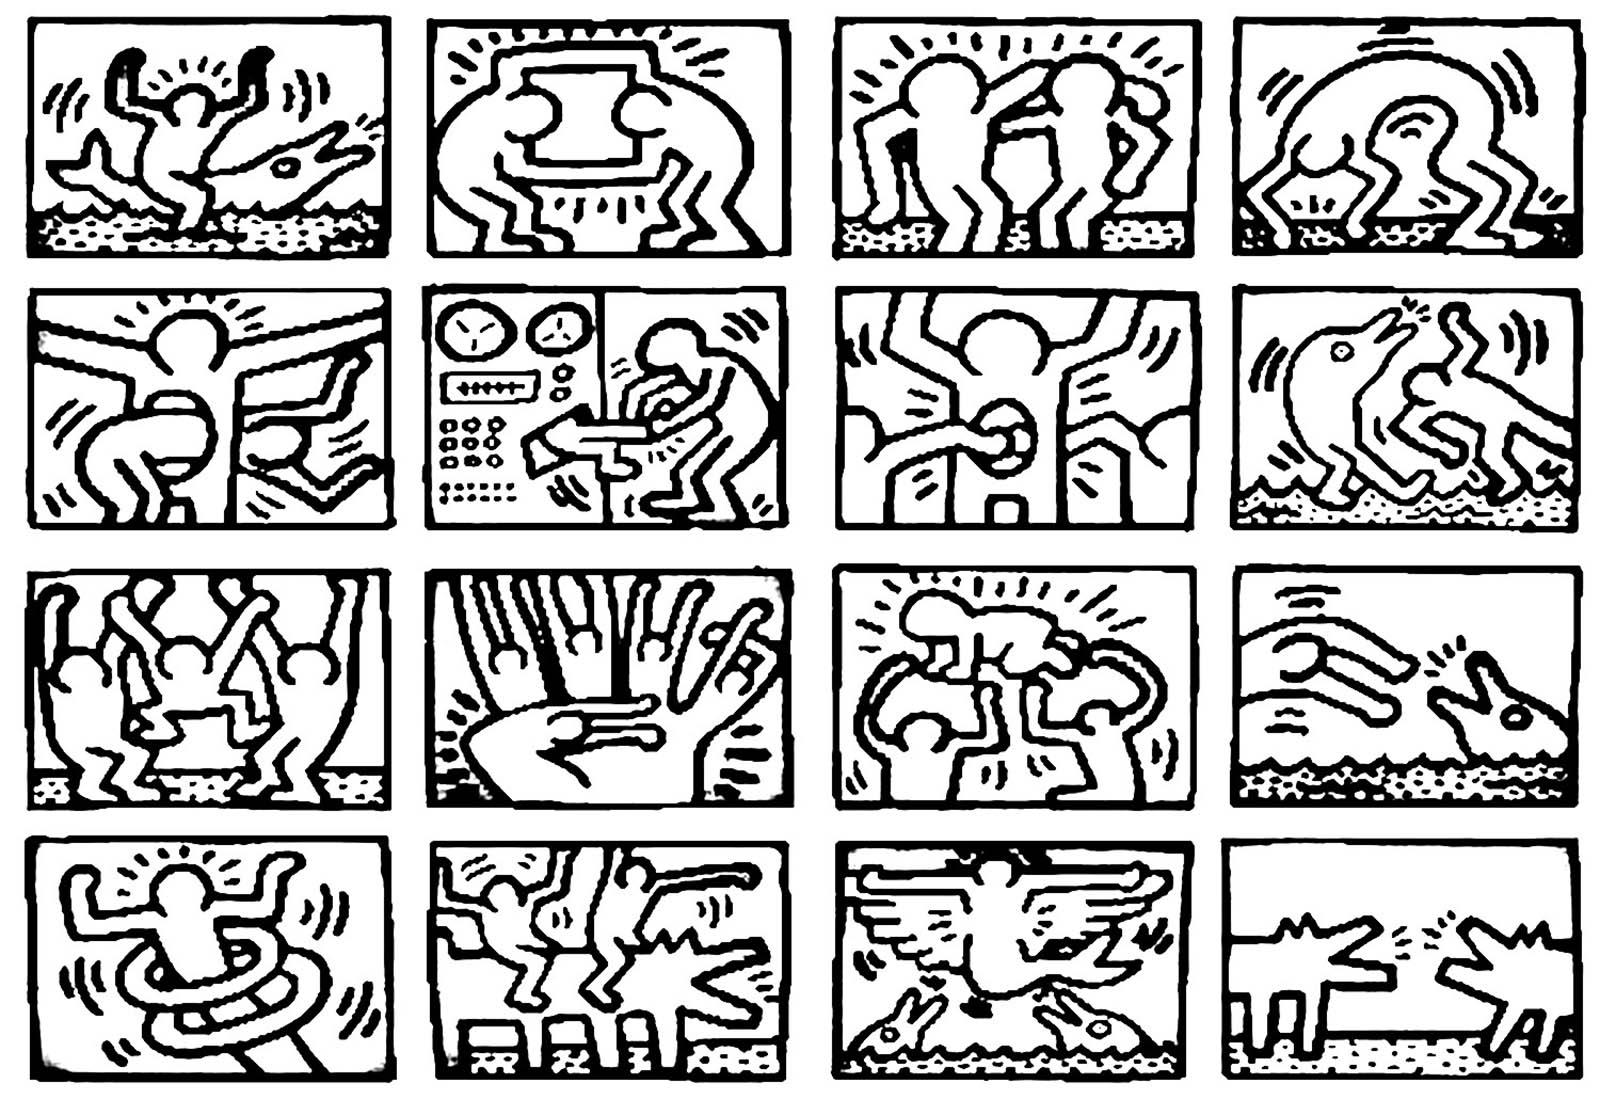 Many situations with Keith Haring characters